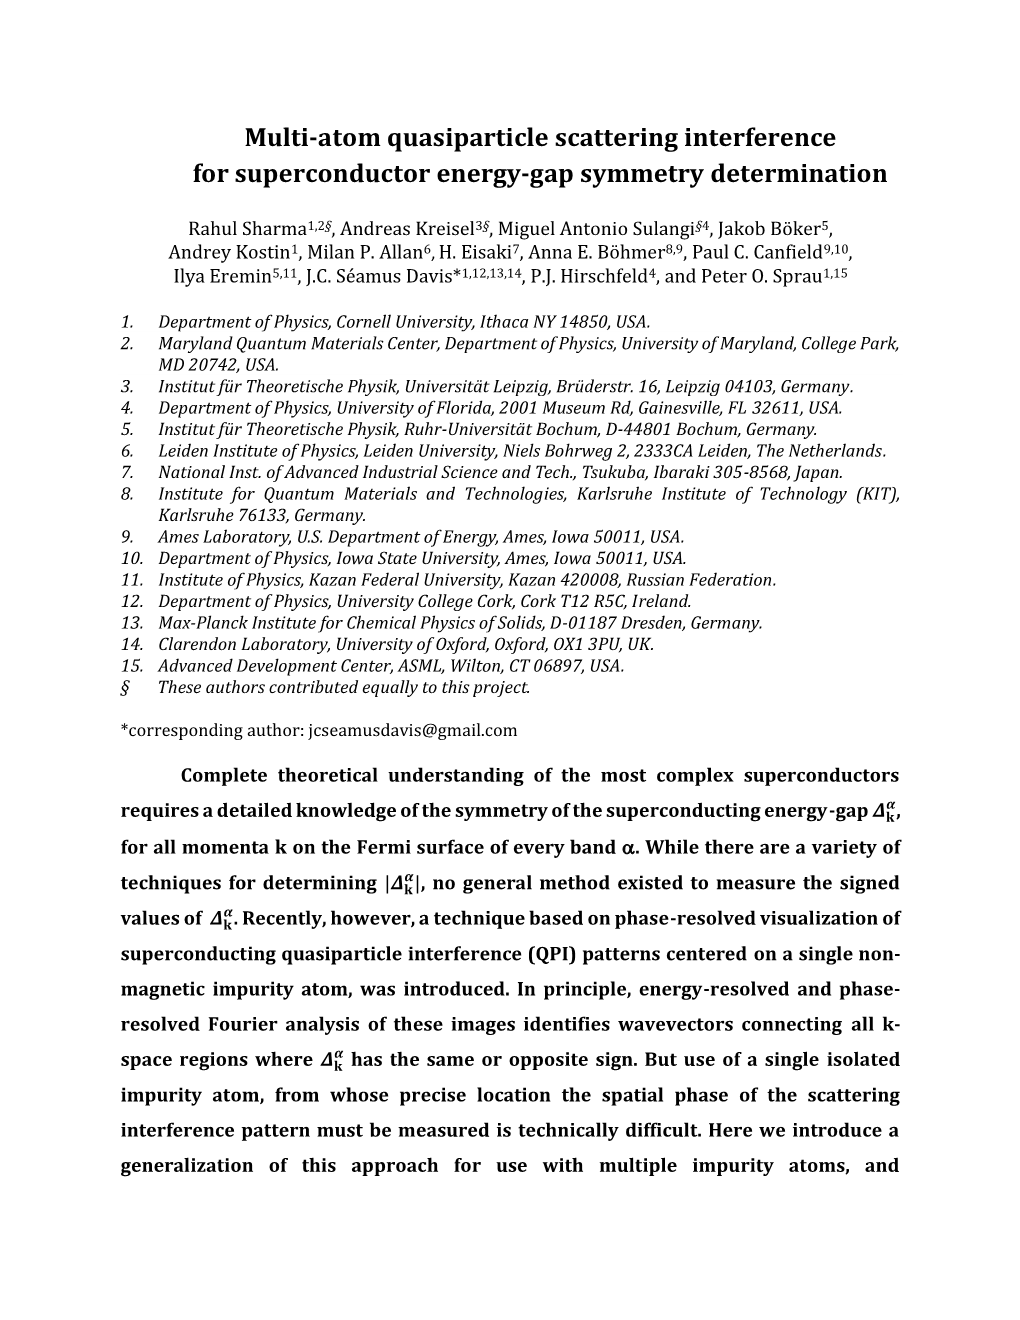 Multi-Atom Quasiparticle Scattering Interference for Superconductor Energy-Gap Symmetry Determination